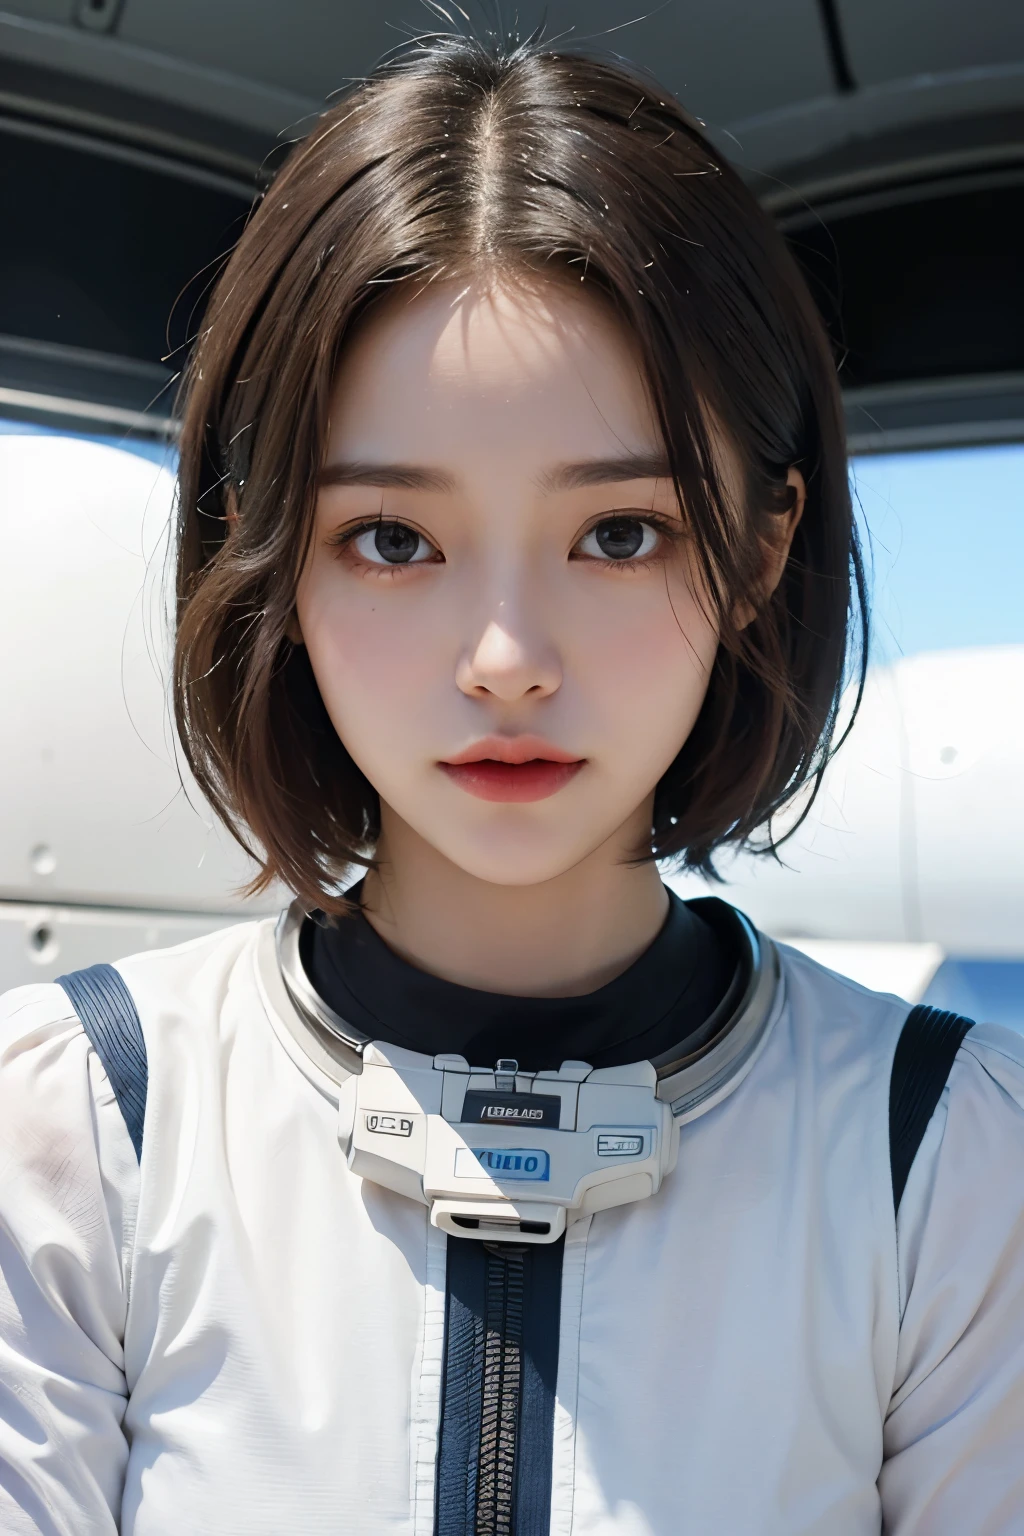 highest quality、masterpiece、ultra high resolution、(real:1.4)、Beautiful woman１、Beautiful details of eyes and skin、light brown short cut hair、small smile、latest space suit、space station、spaceship、Remains、cloudy sky、